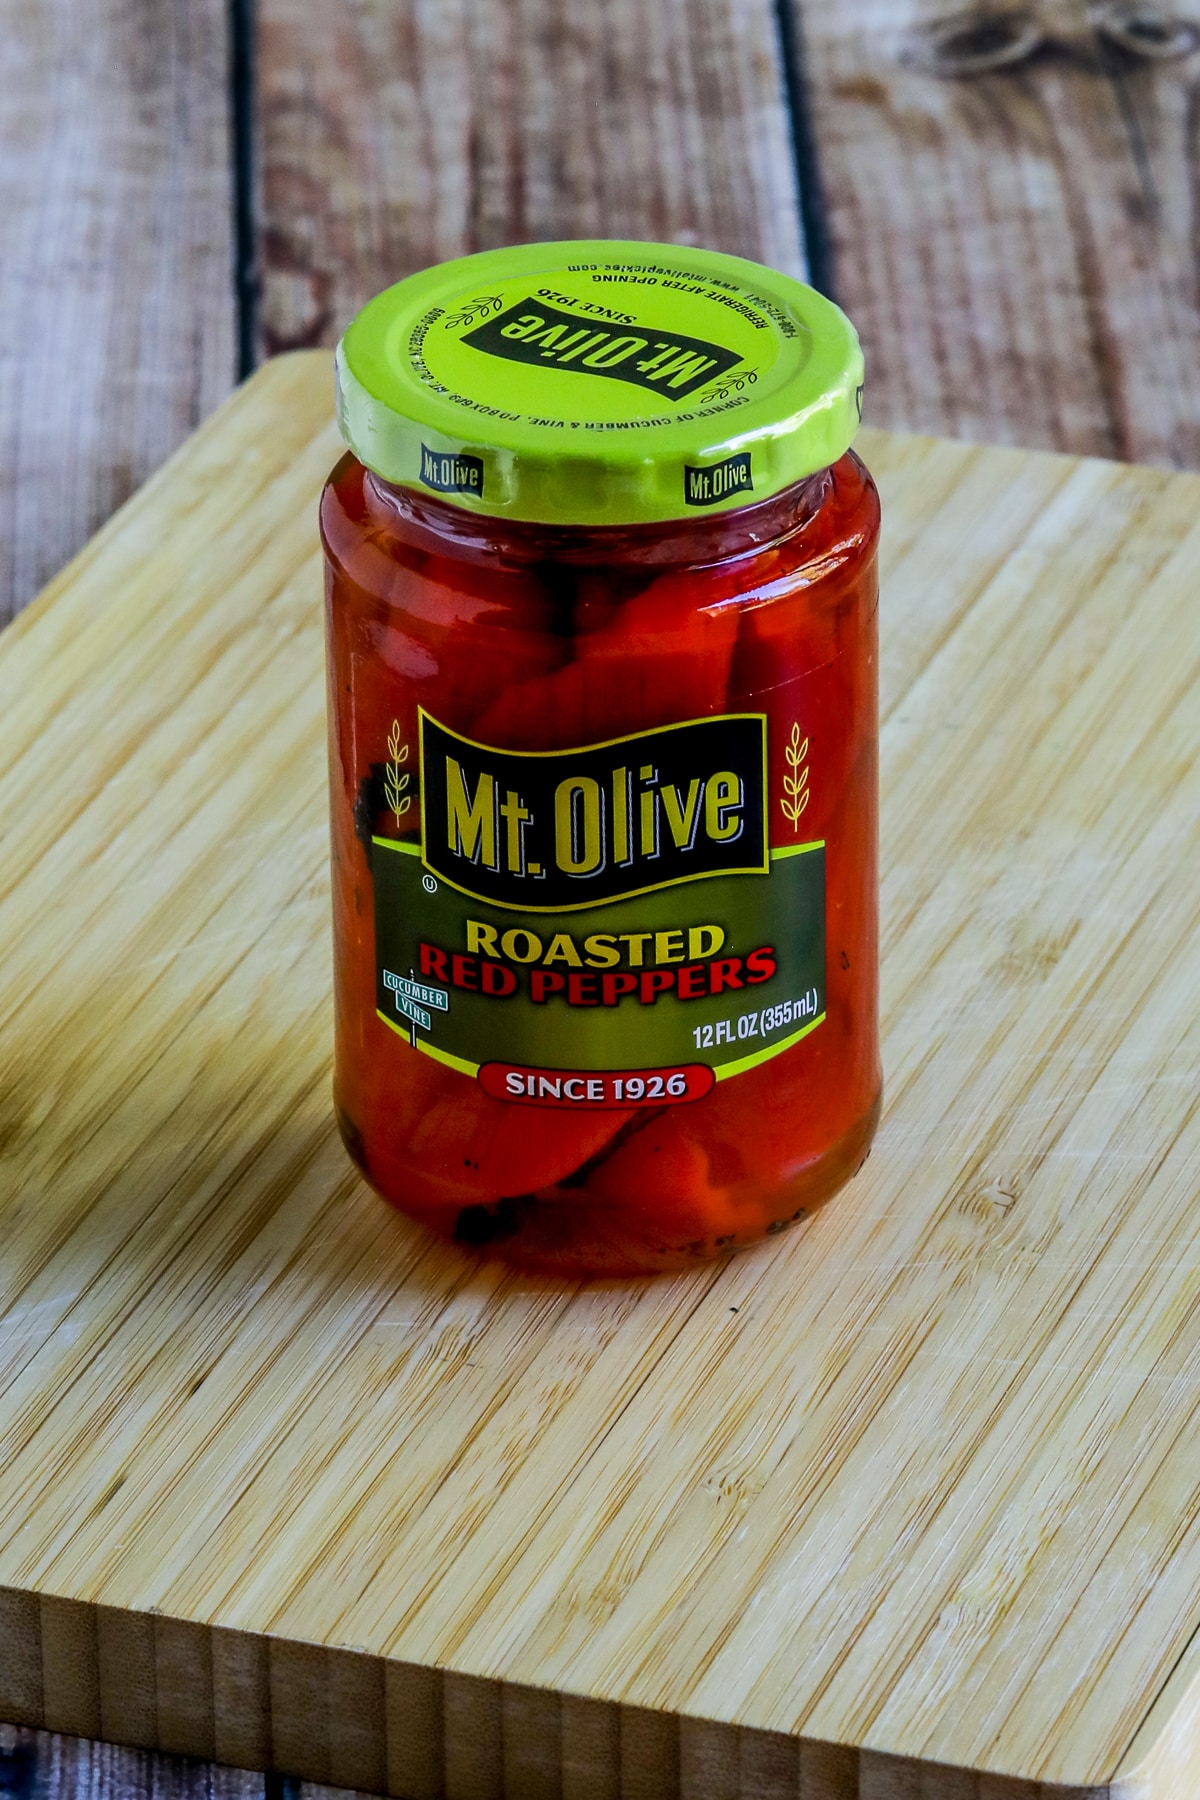 Roasted Red Peppers in a jar shown on cutting board.